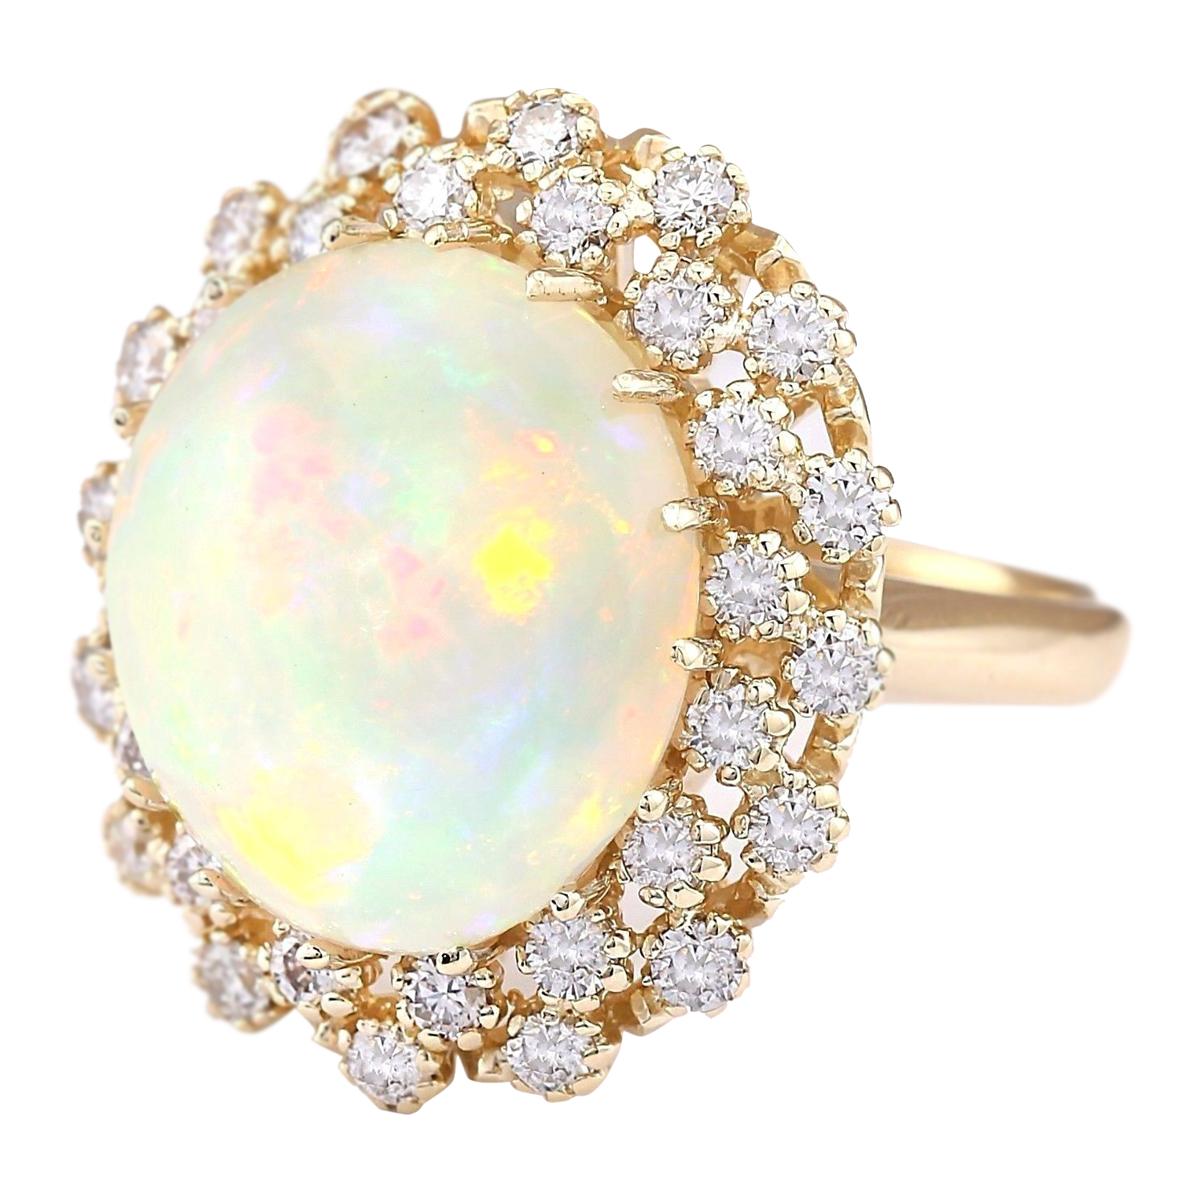 Stamped: 14K Yellow Gold
Total Ring Weight: 11.5 Grams
Total Natural Opal Weight is 10.19 Carat (Measures: 16.00x14.00 mm)
Color: Multicolor
Total Natural Diamond Weight is 1.10 Carat
Color: F-G, Clarity: VS2-SI1
Face Measures: 24.40x21.45 mm
Sku: